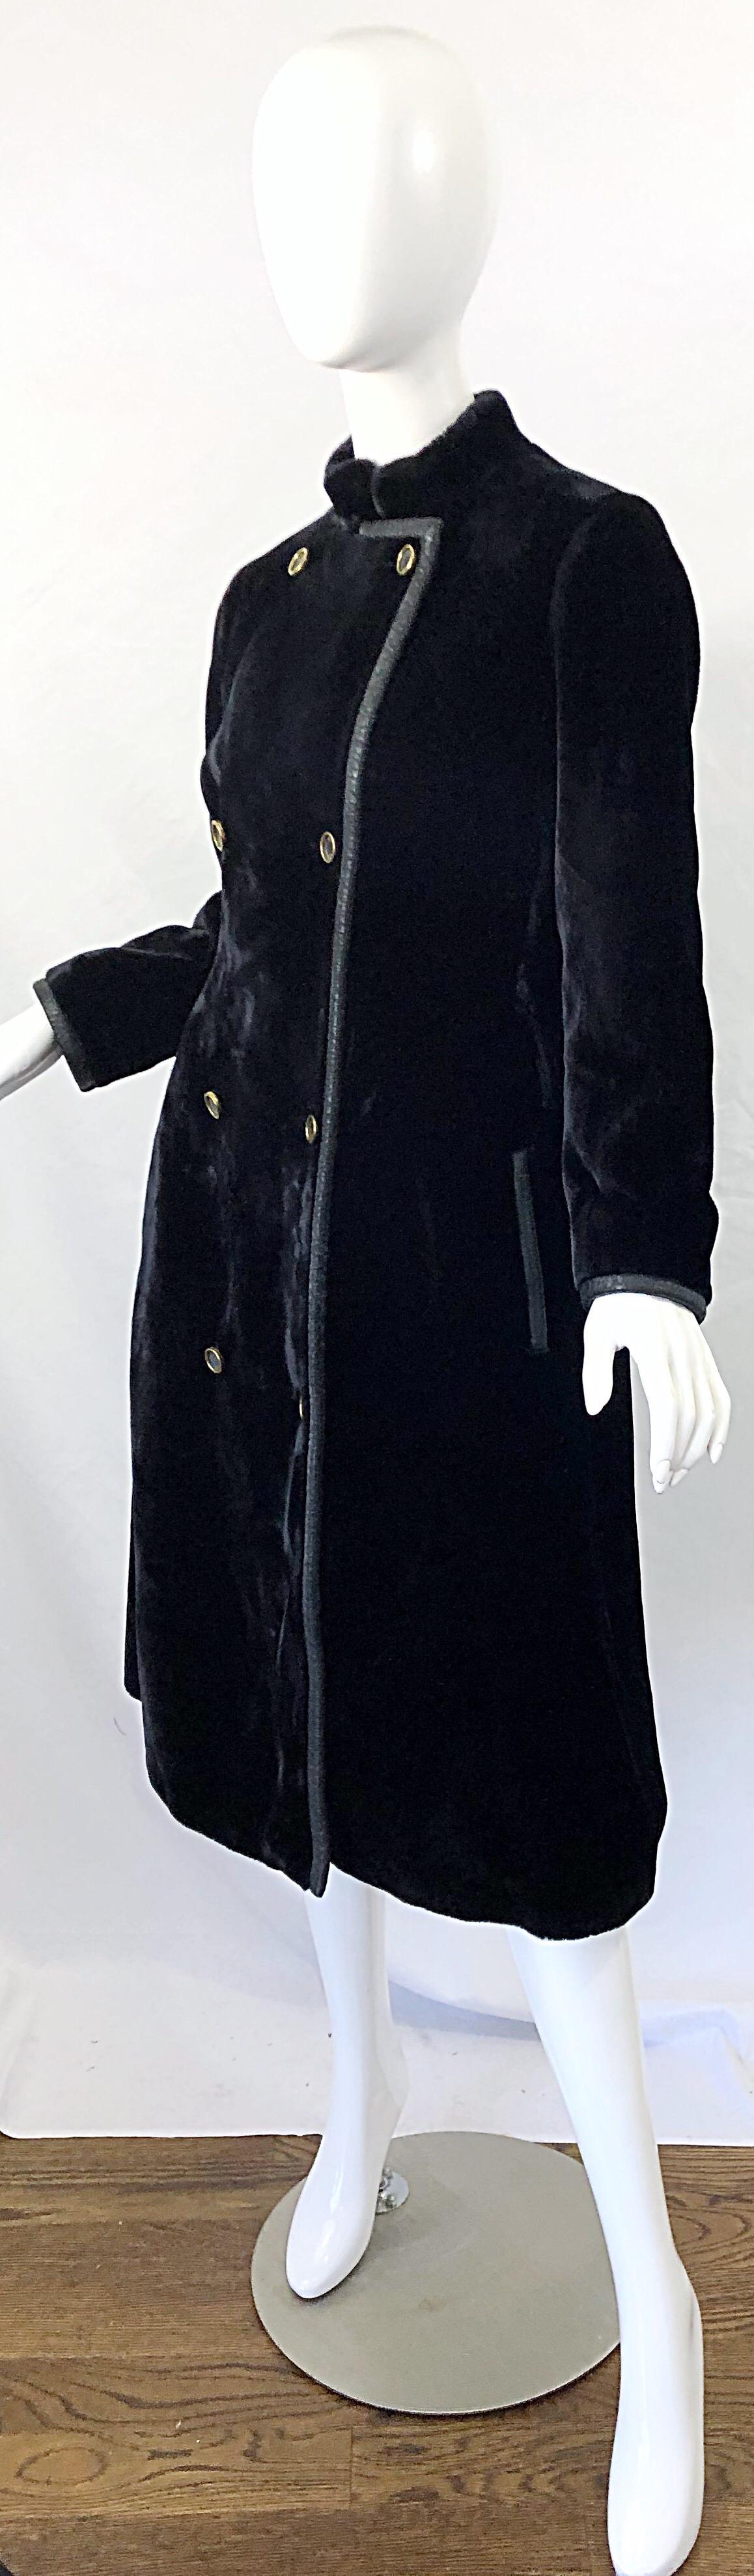 Givenchy 1960s Faux Fur Black Double Breasted Vintage 60s Swing Jacket Coat 1